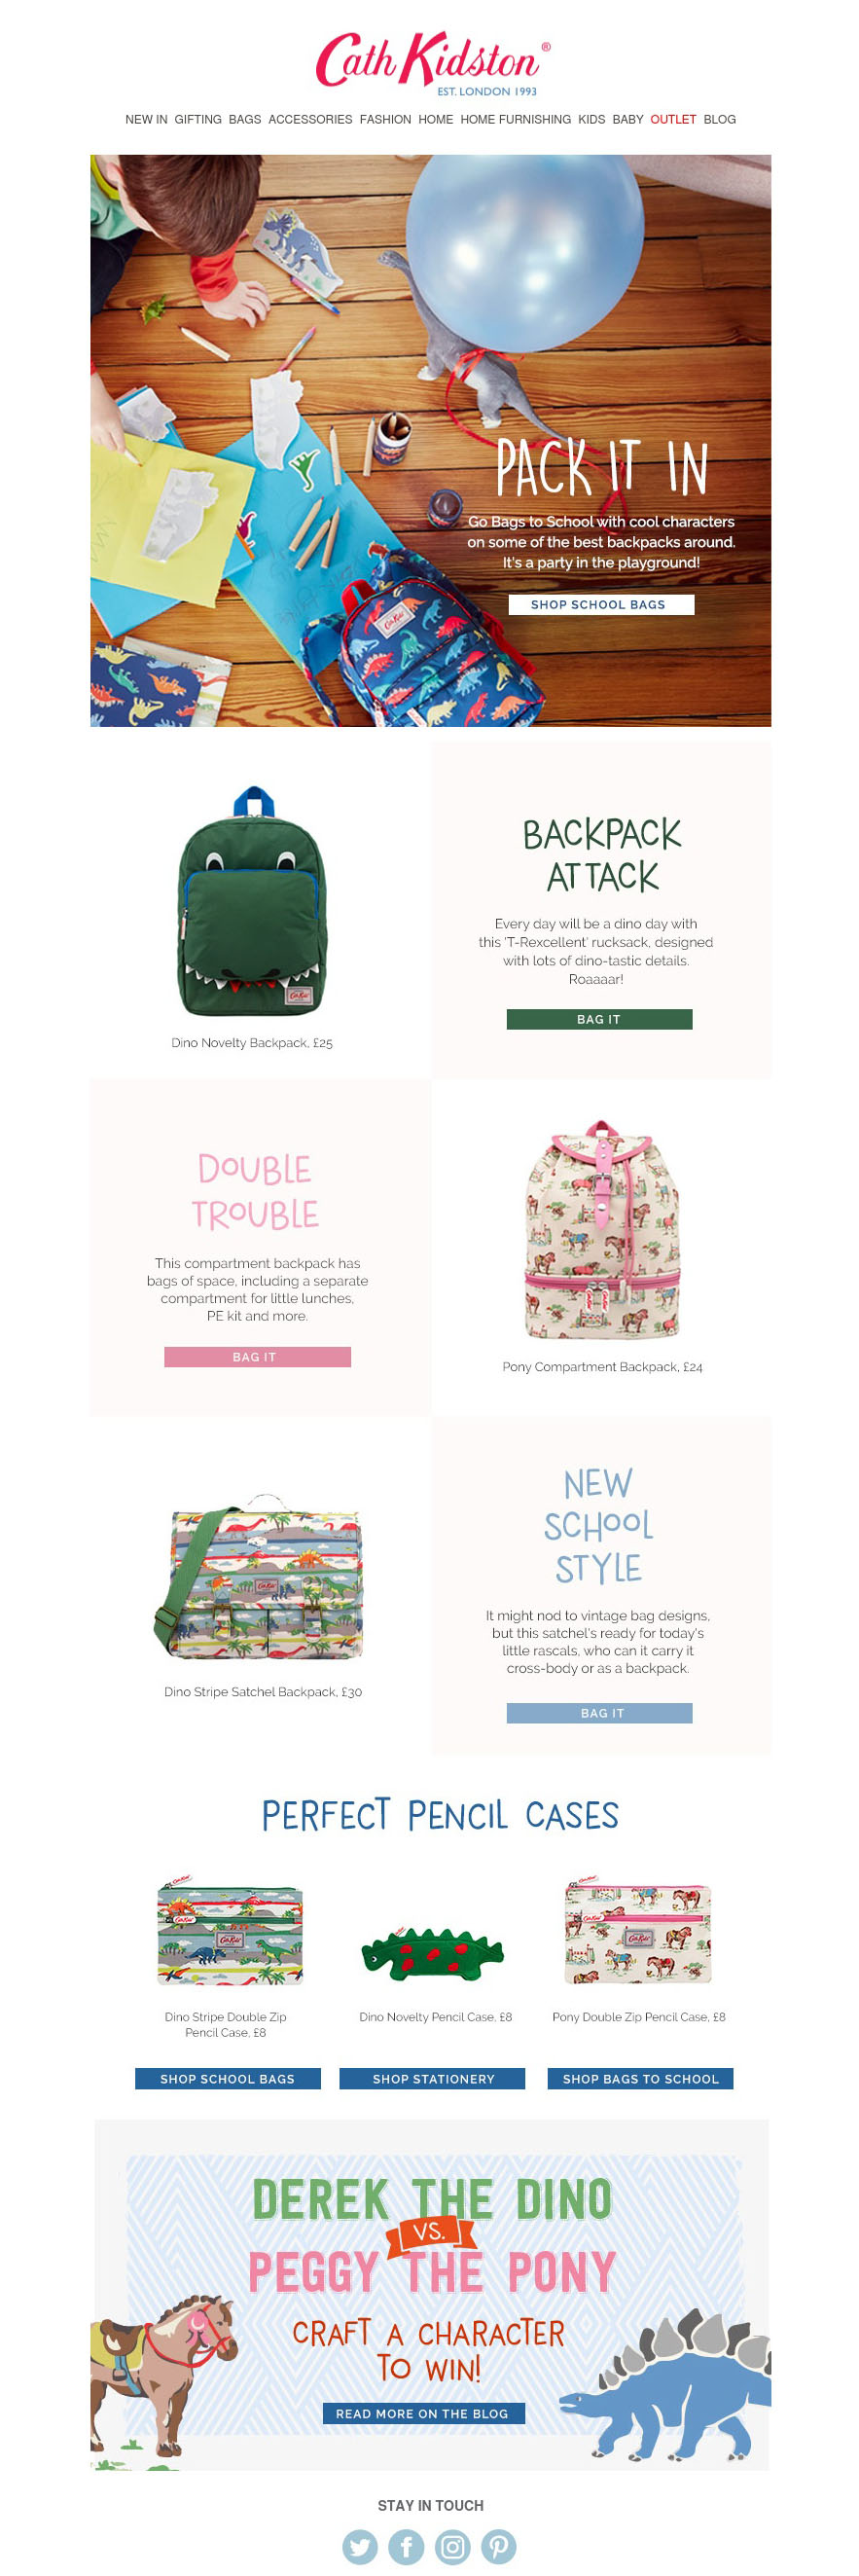 Cath Kidston back to school email newsletter